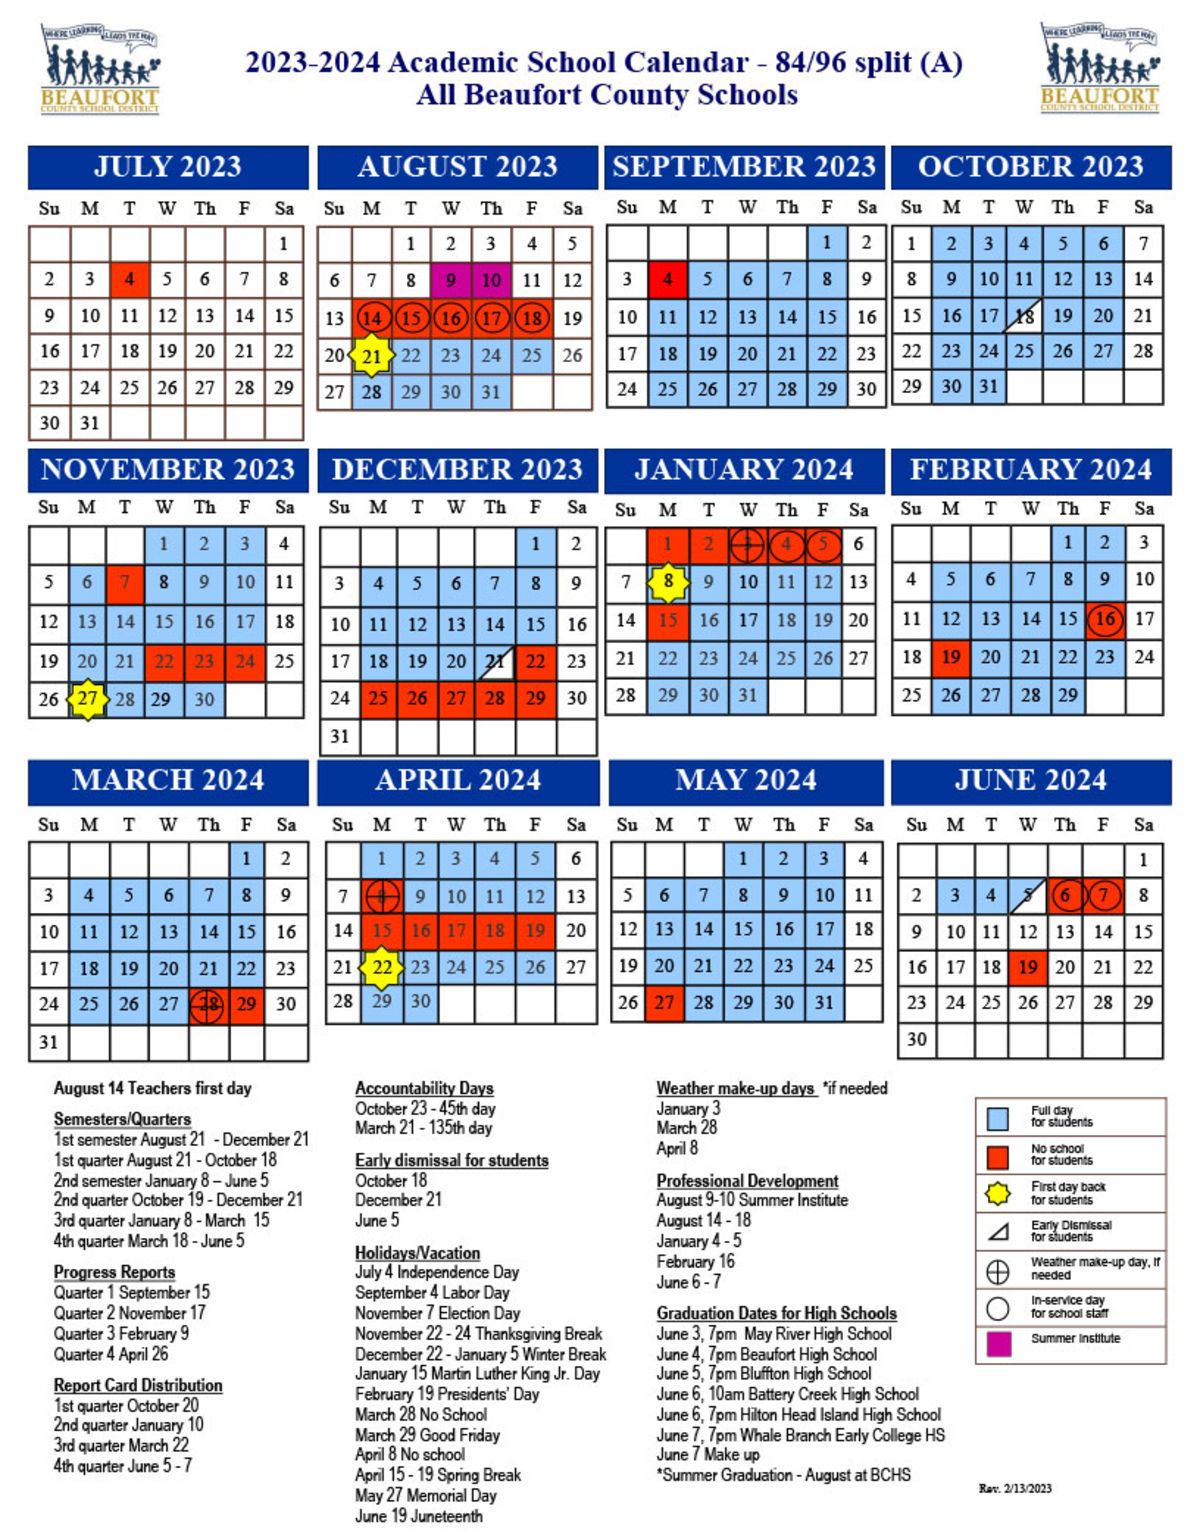 Board of Education approves school calendar for 202324 academic year